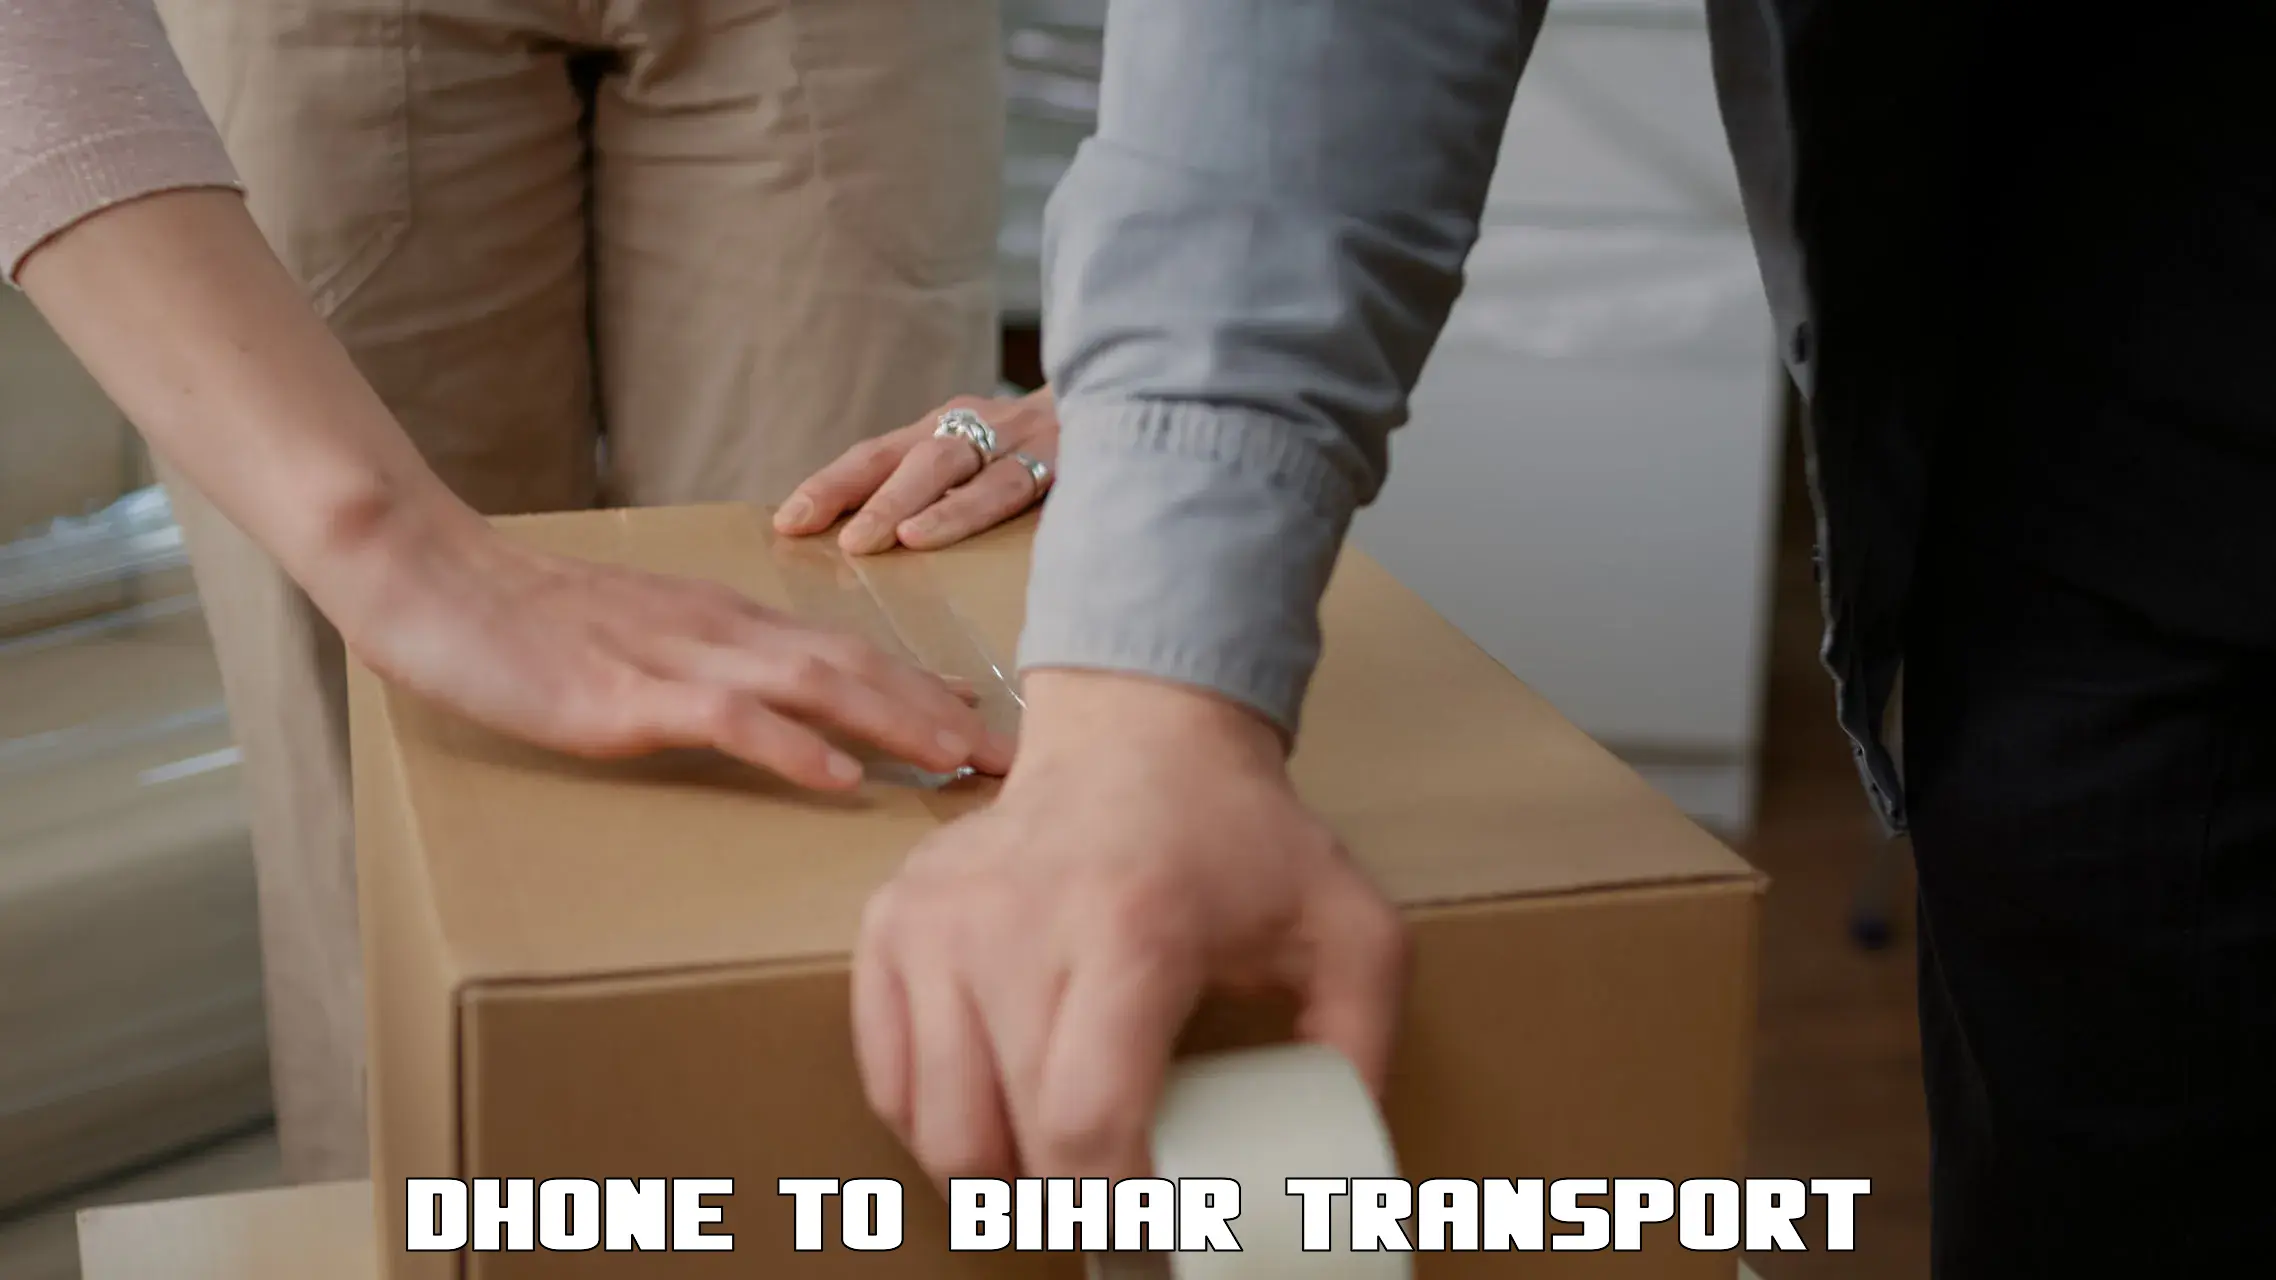 Pick up transport service Dhone to Banka